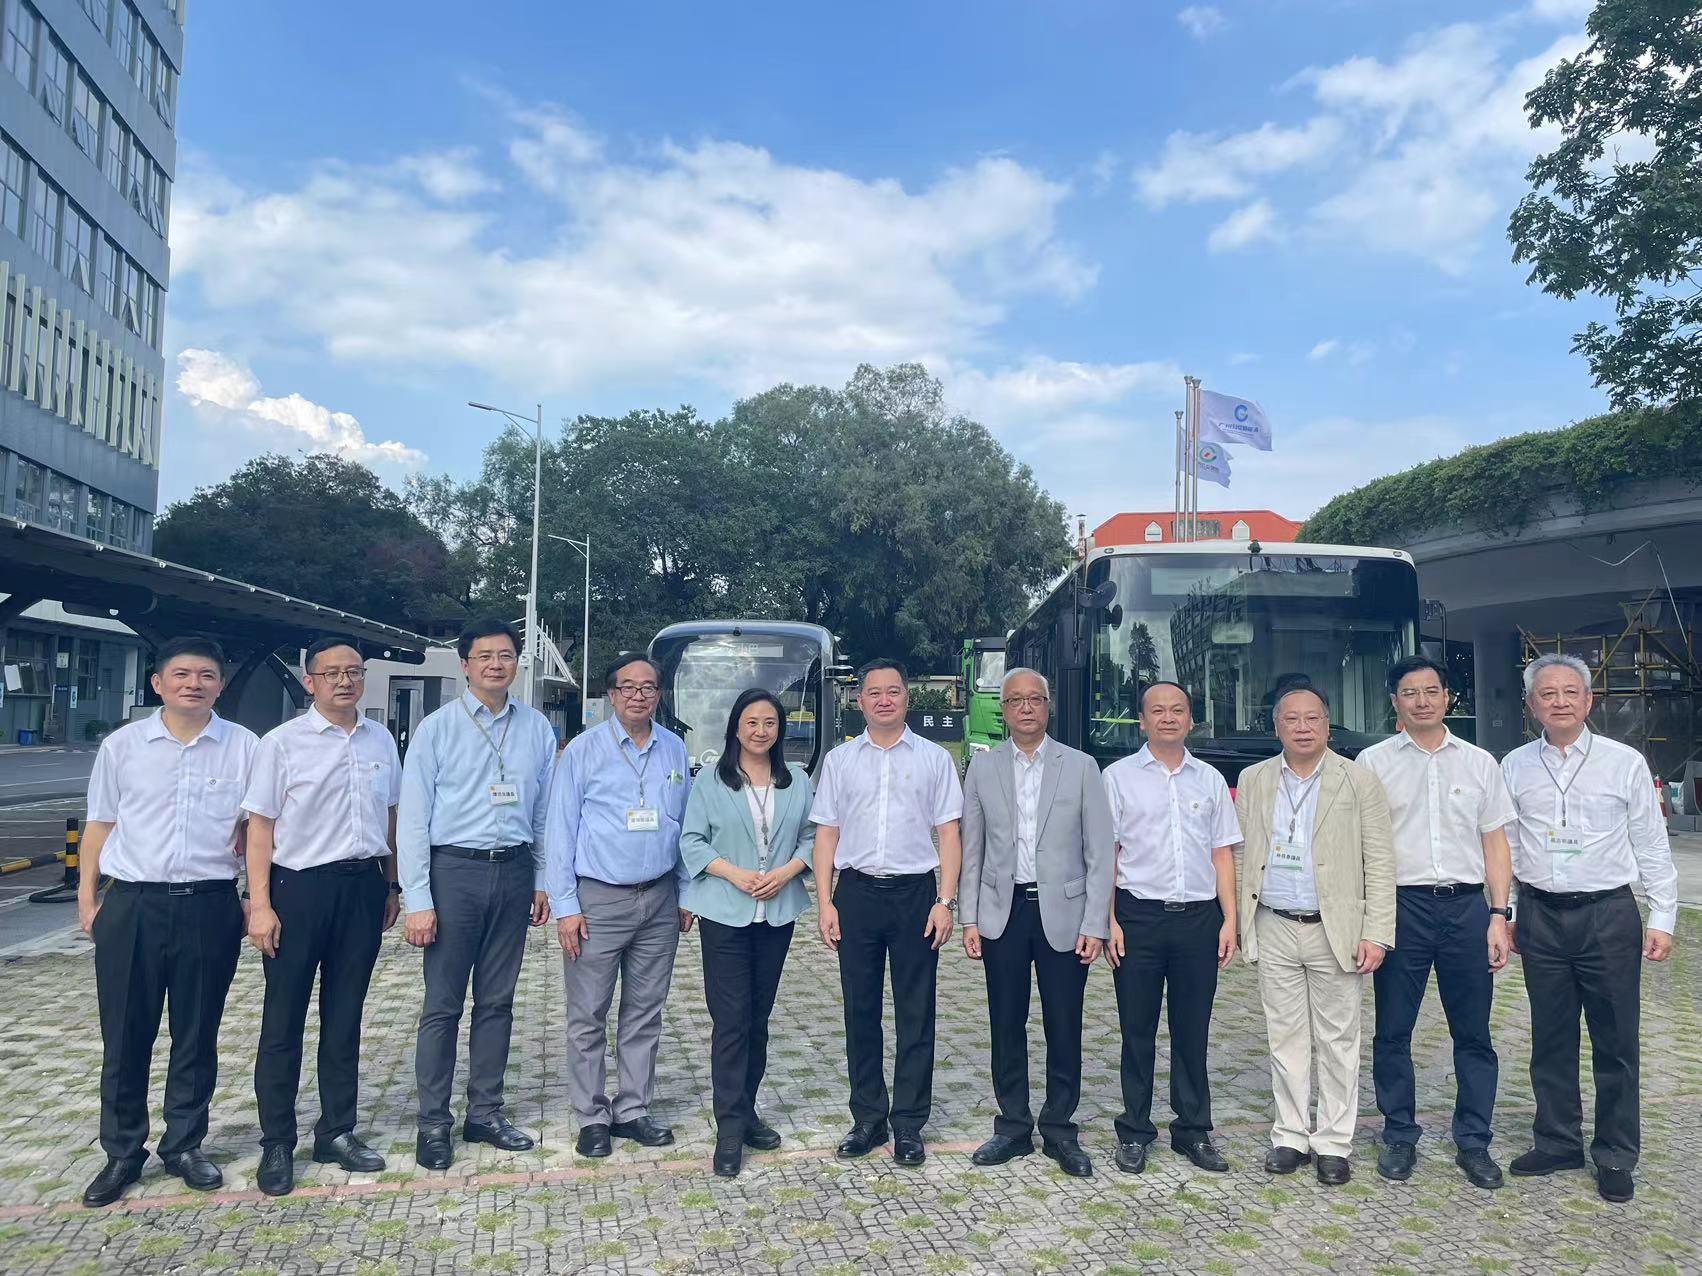 The Secretary for Environment and Ecology, Mr Tse Chin-wan, together with the Legislative Council Panel on Environmental Affairs, visited the Yanling new energy eco-industrial park and Guangzhou public transport command center of the Guangzhou Public Transport Group this afternoon (August 7). Photo shows Mr Tse (fifth right), and the delegation of the Legislative Council Panel on Environmental Affairs.